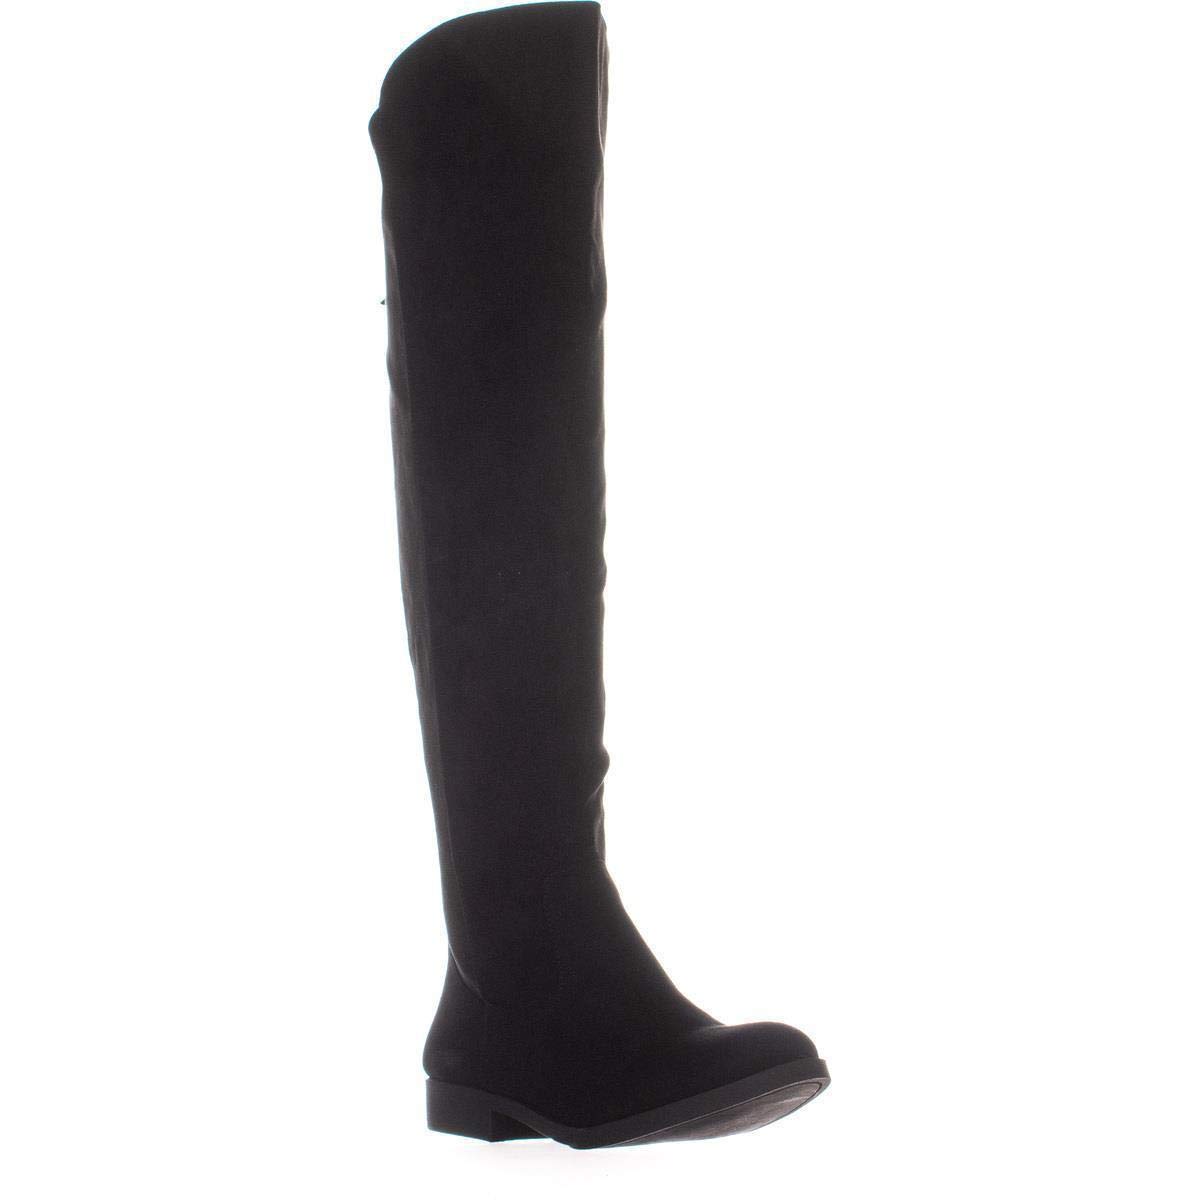 Style & Co. Womens Hayley Round Toe Over Knee Fashion Boots, Black, Size 12.0 8c eBay